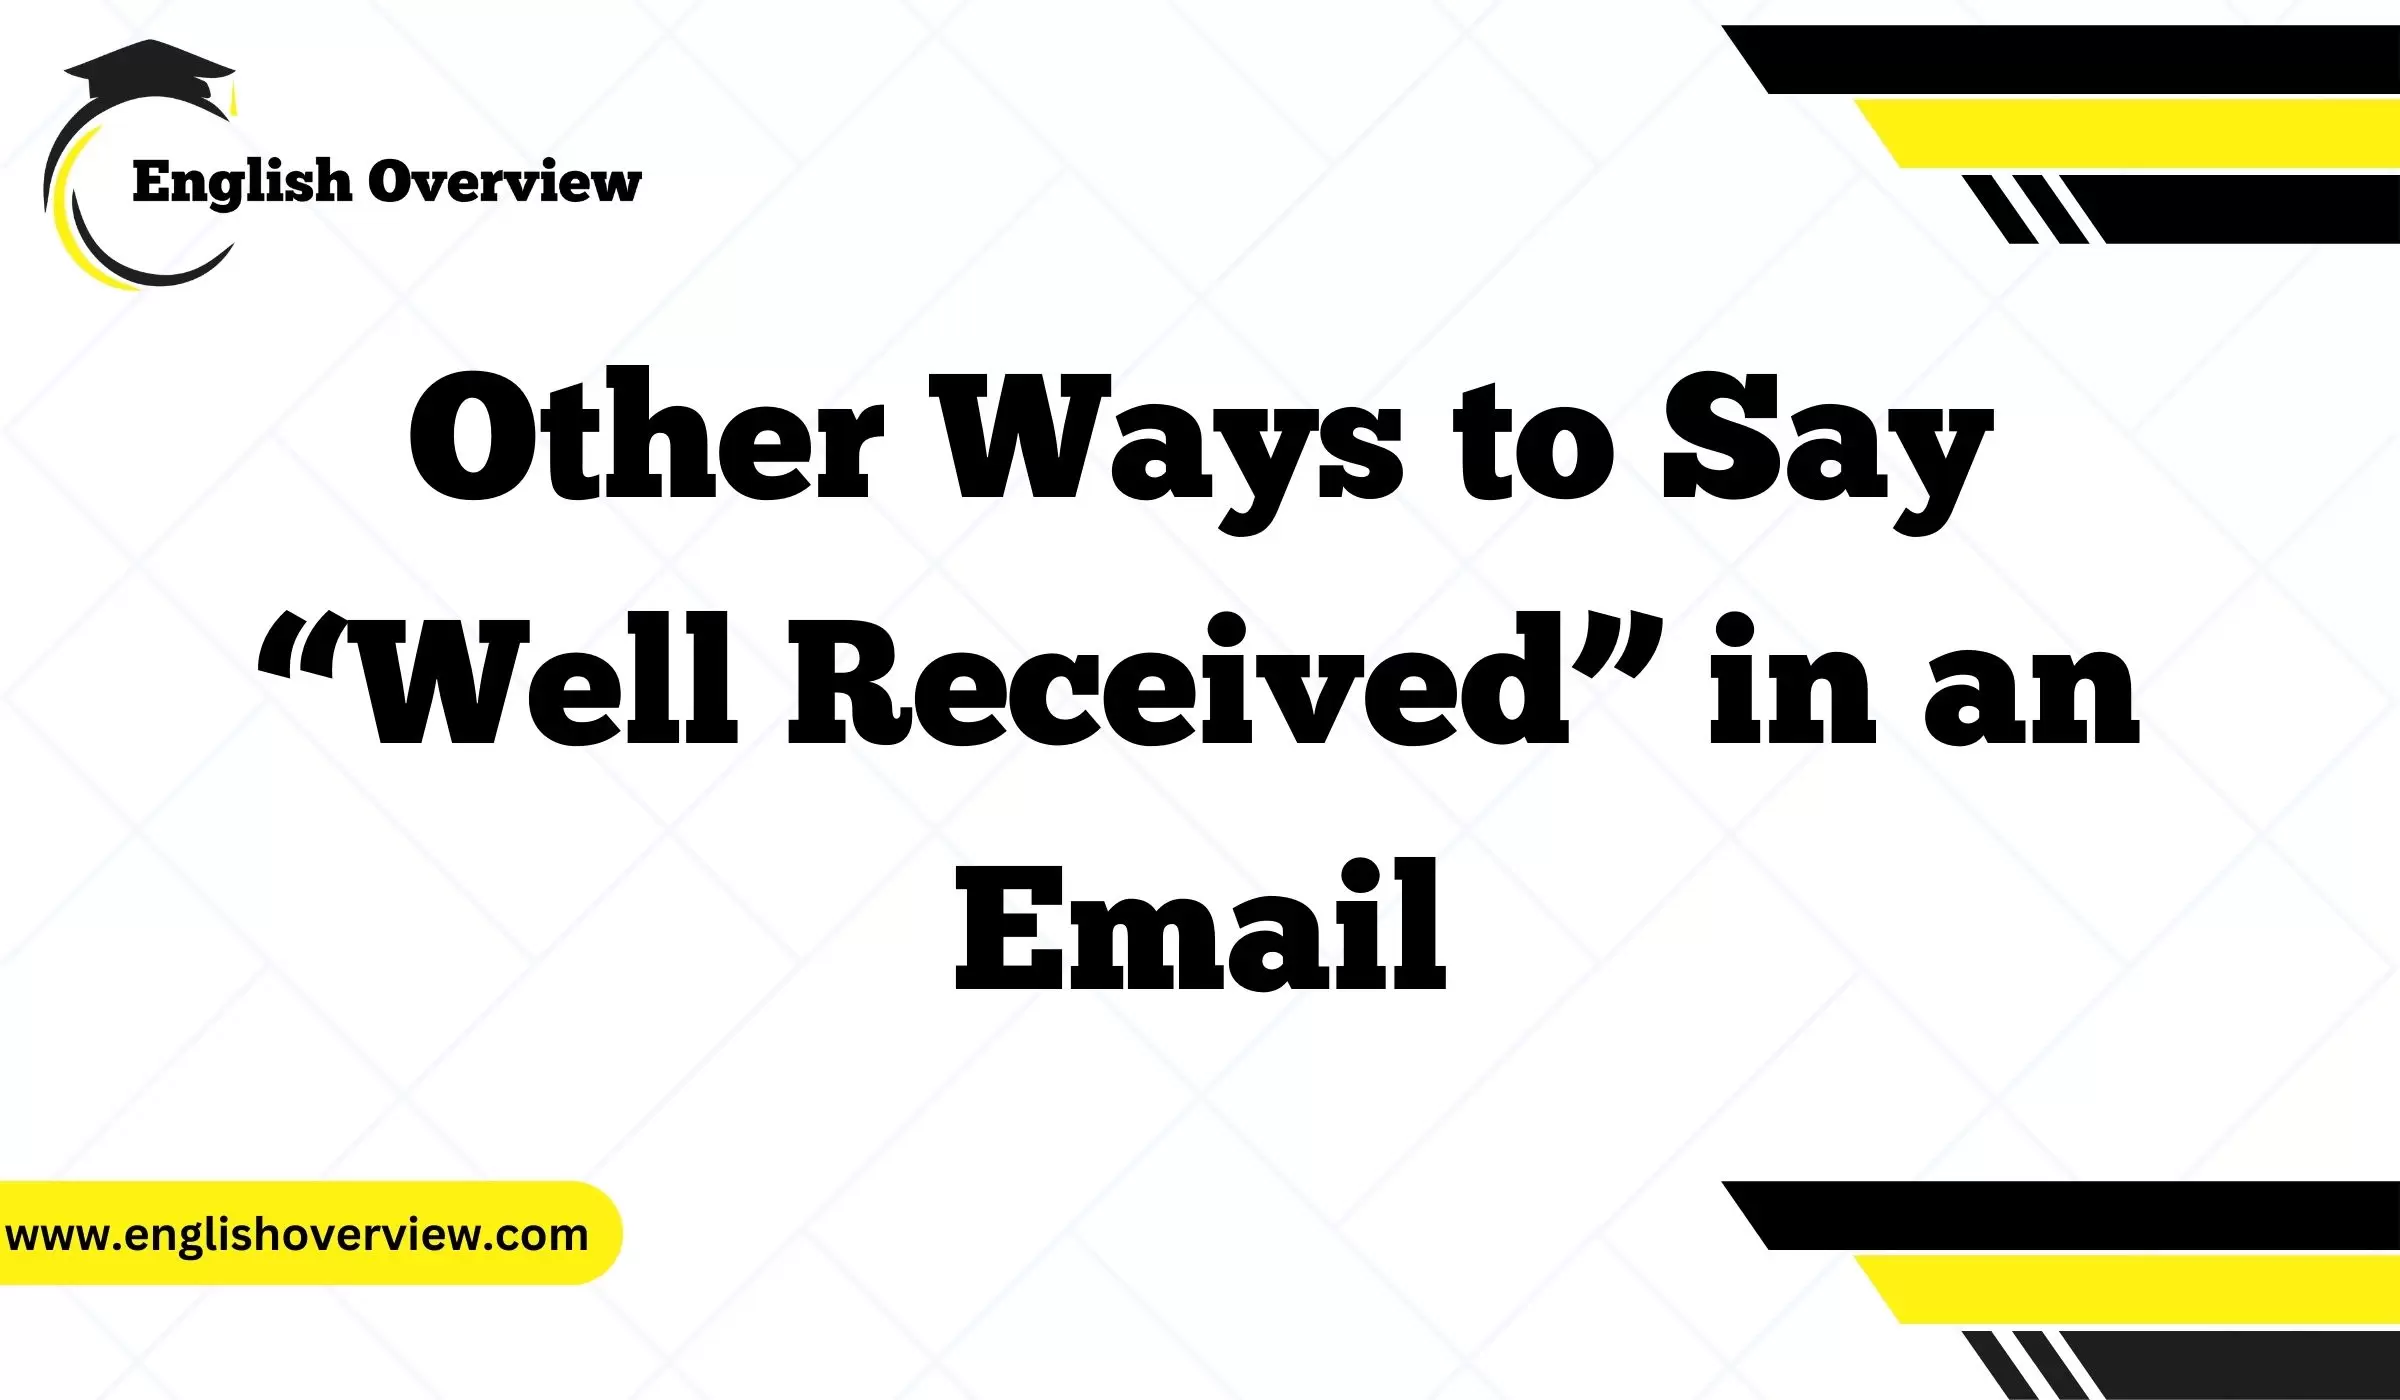 Other Ways to Say “Well Received” in an Email